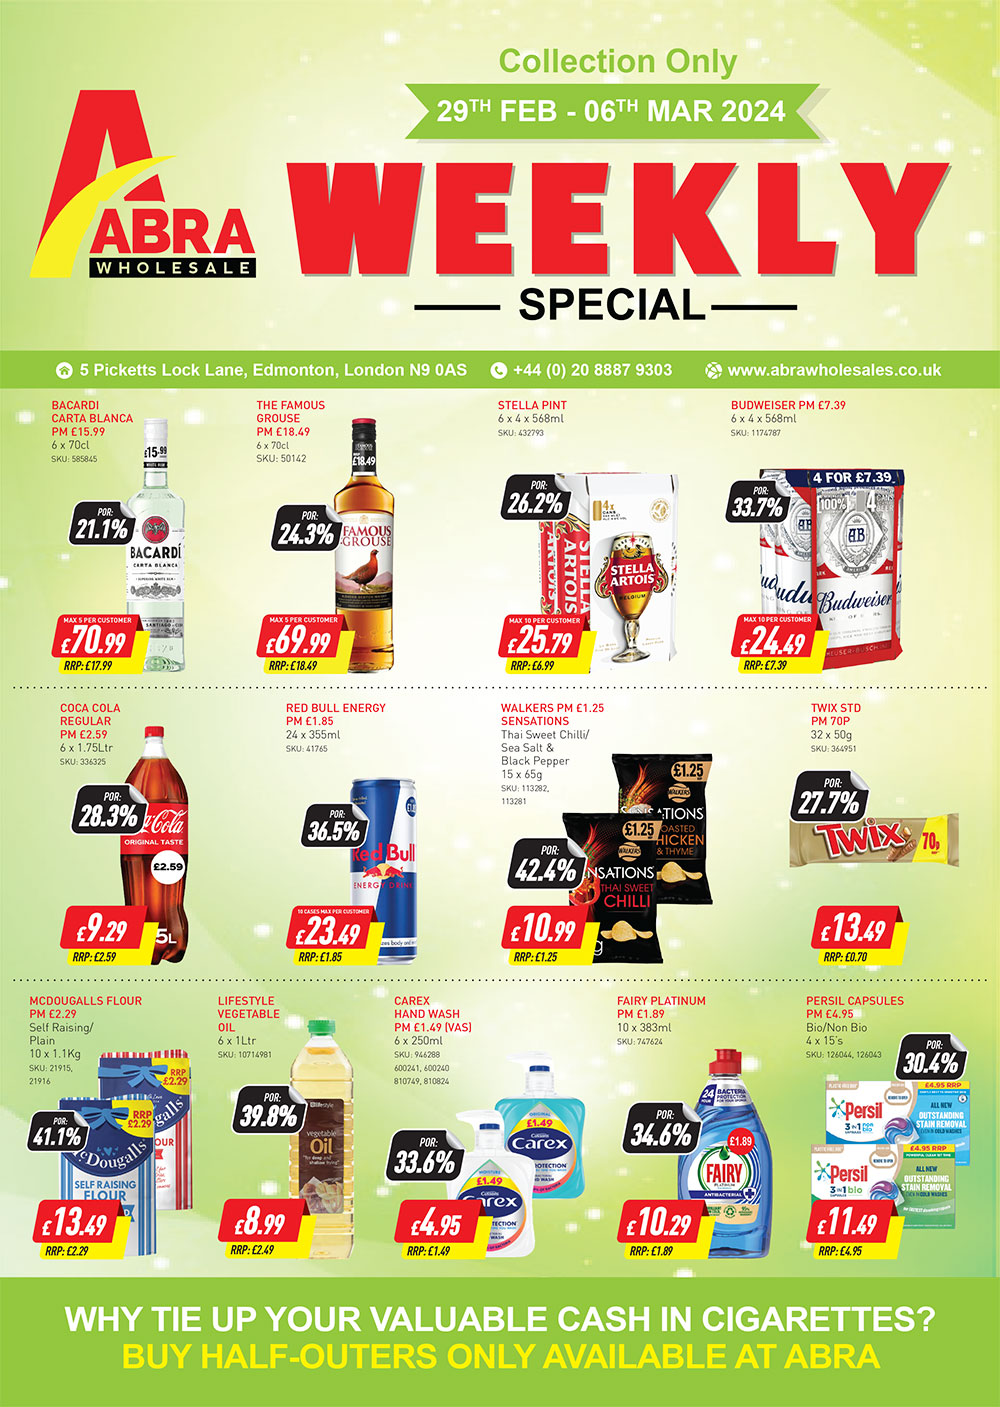 weekly special